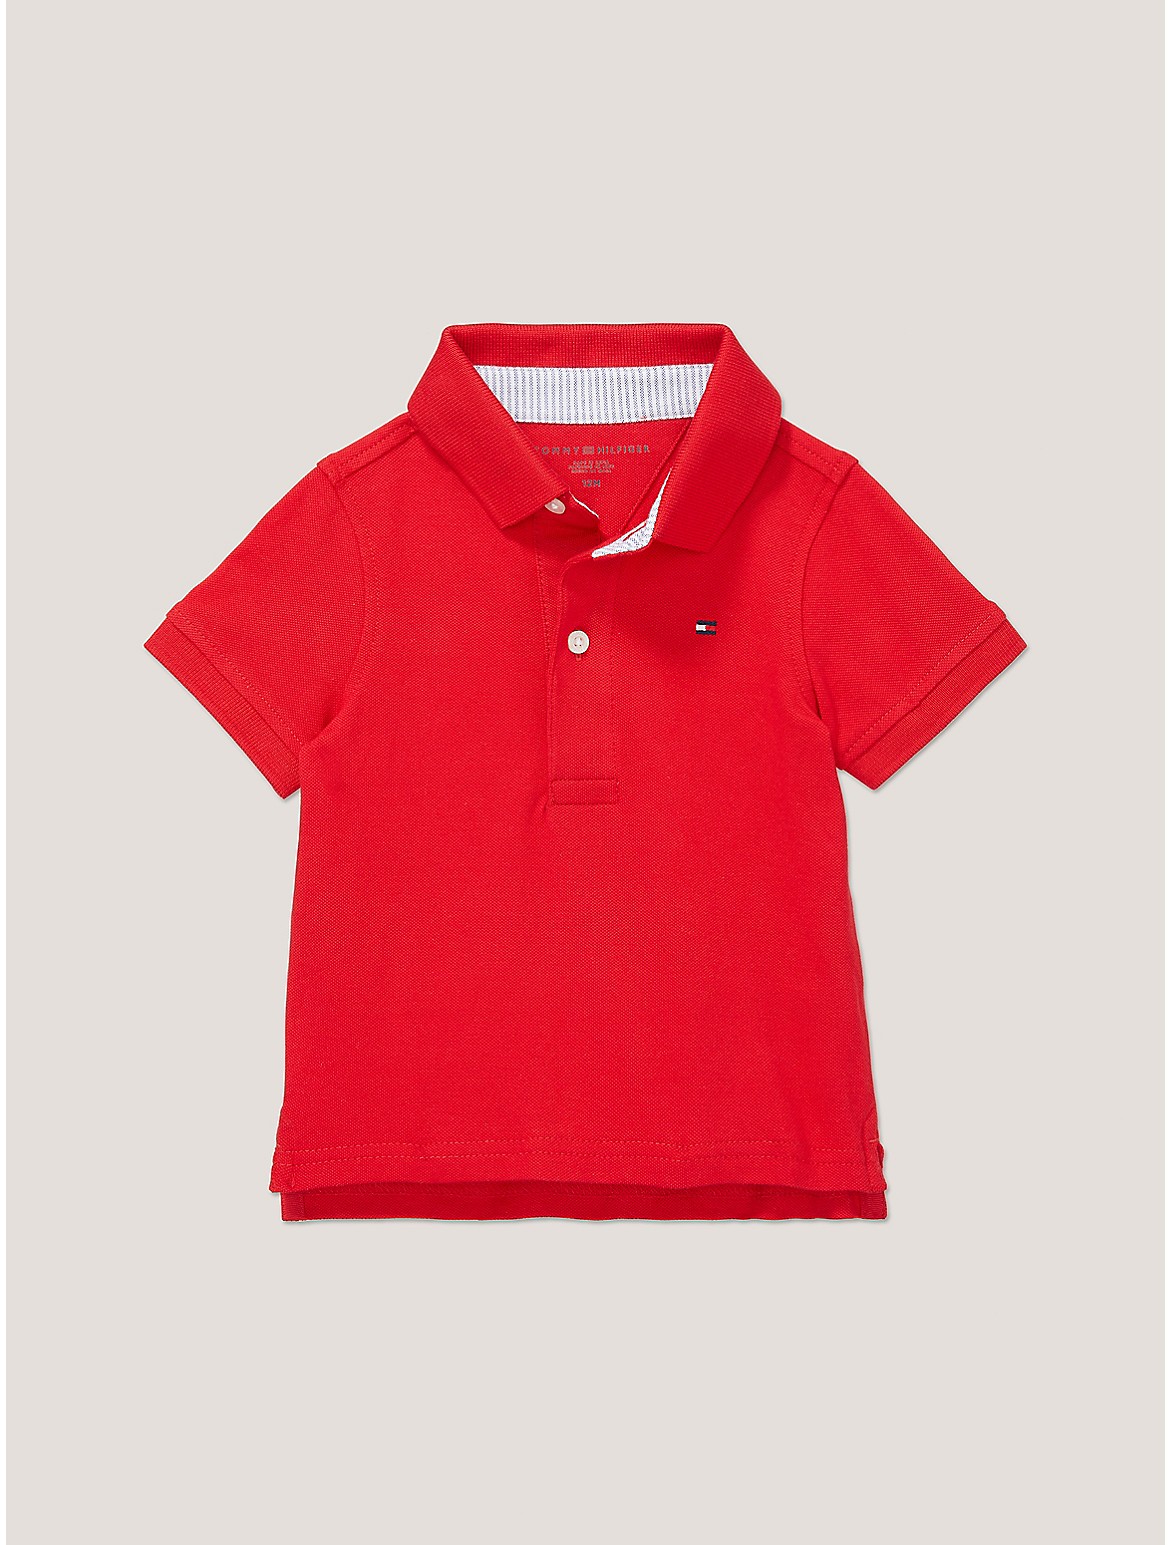 Tommy Hilfiger Boys' Babies' Solid Stretch Polo - Red - 24M